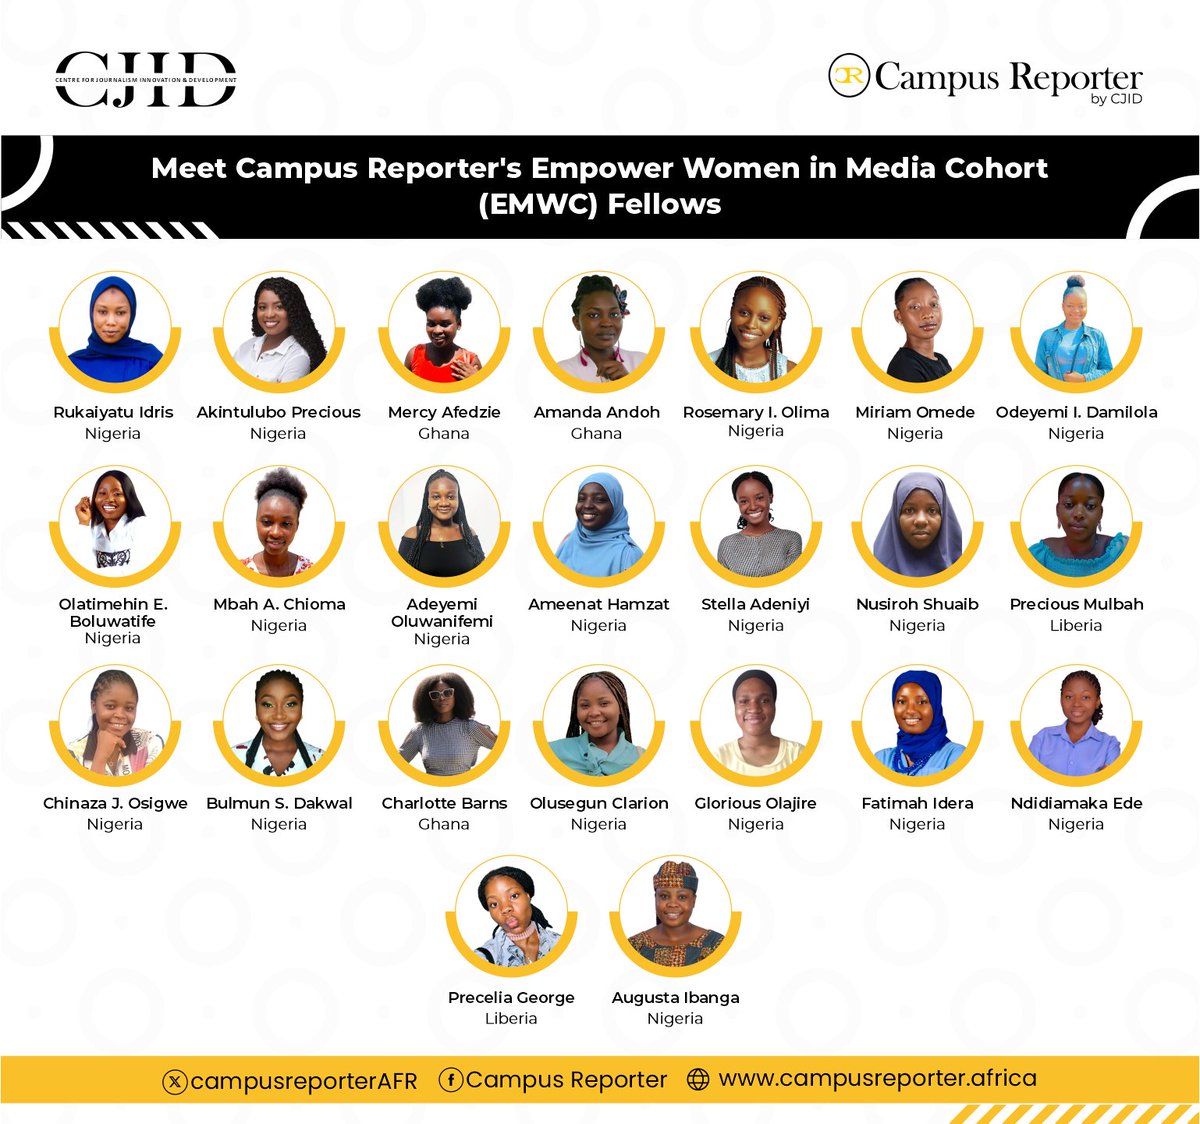 Exciting news! Campus Reporter is thrilled to announce the selection of 23 talented female campus journalists across West Africa for the first Empower Women in Media Cohort. They will undergo an intensive 3-month training program where they will learn from accomplished female…